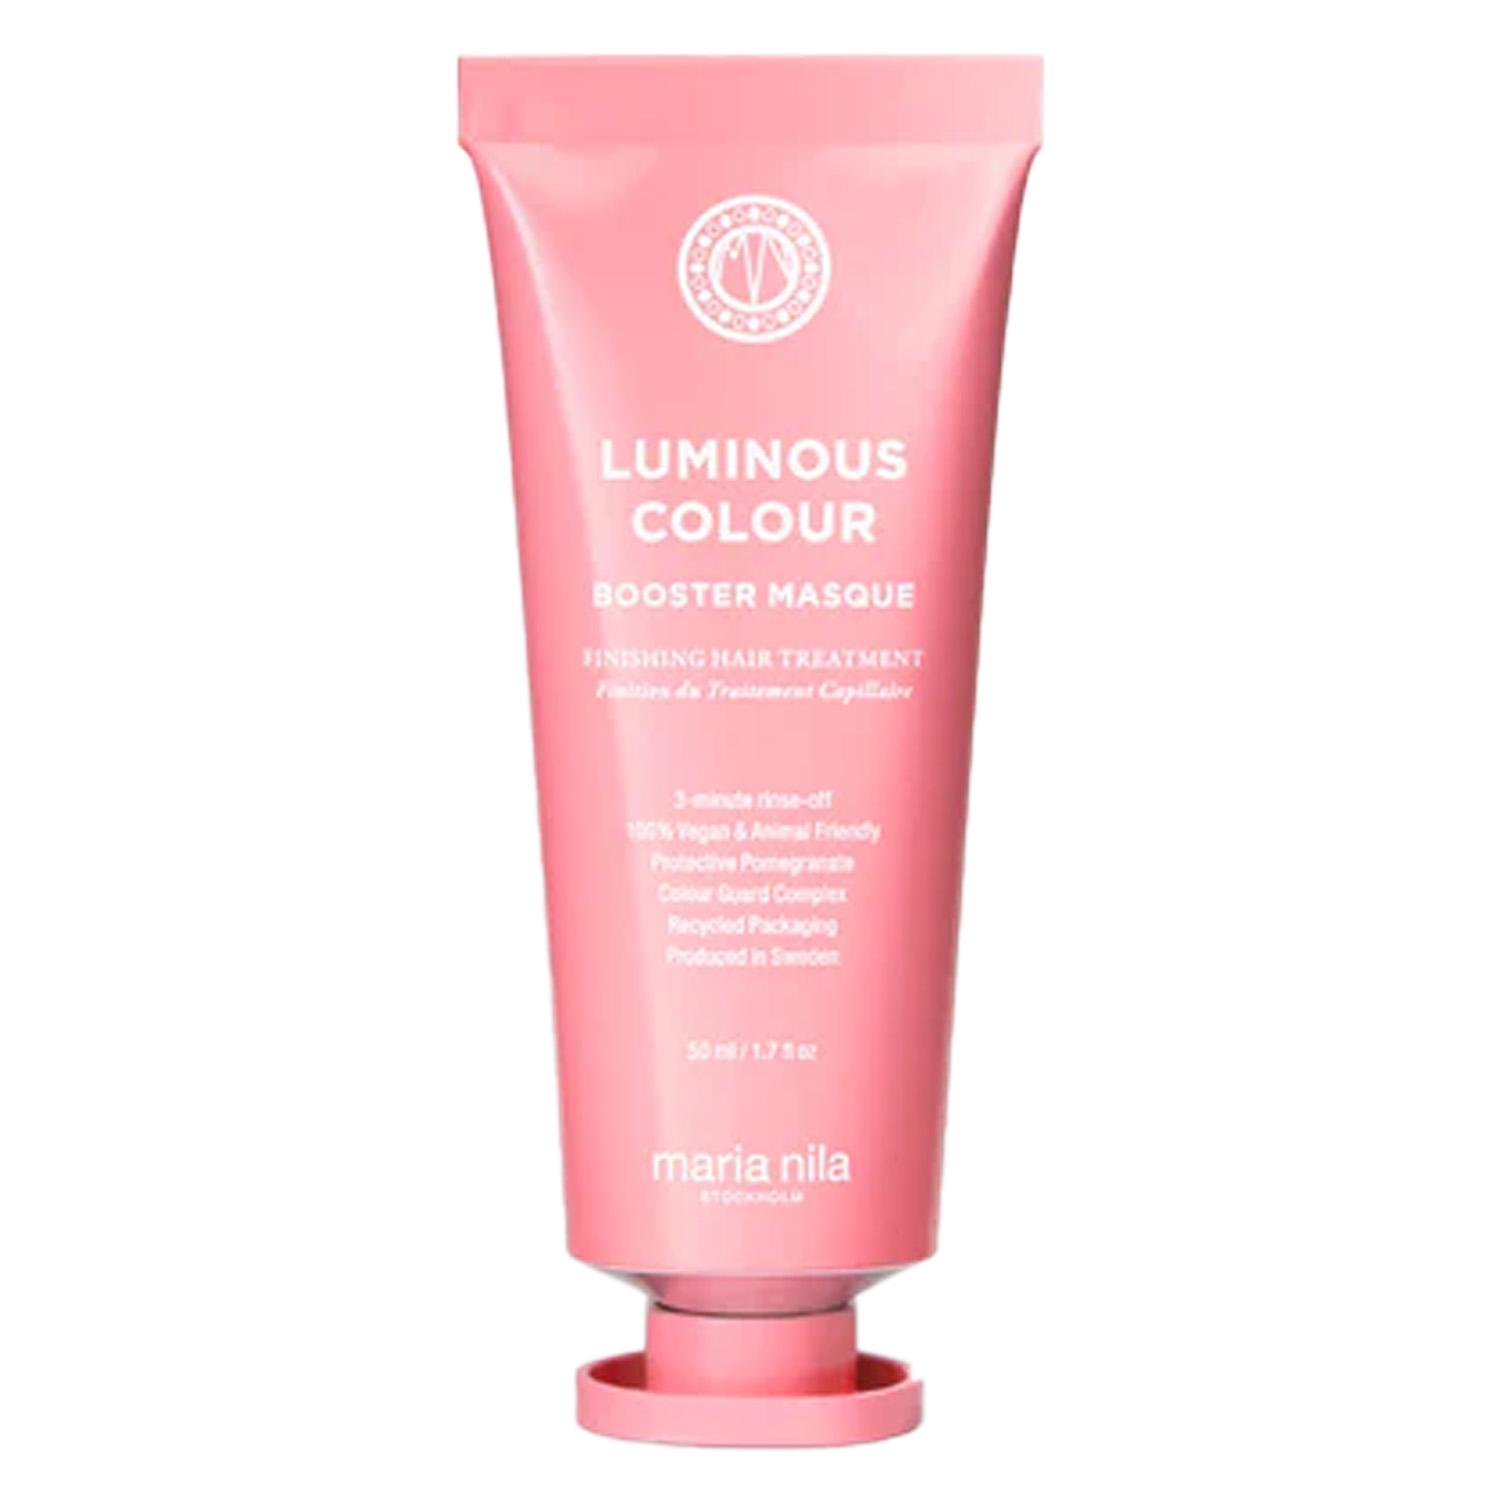 Care & Style - Luminous Colour Booster Mask